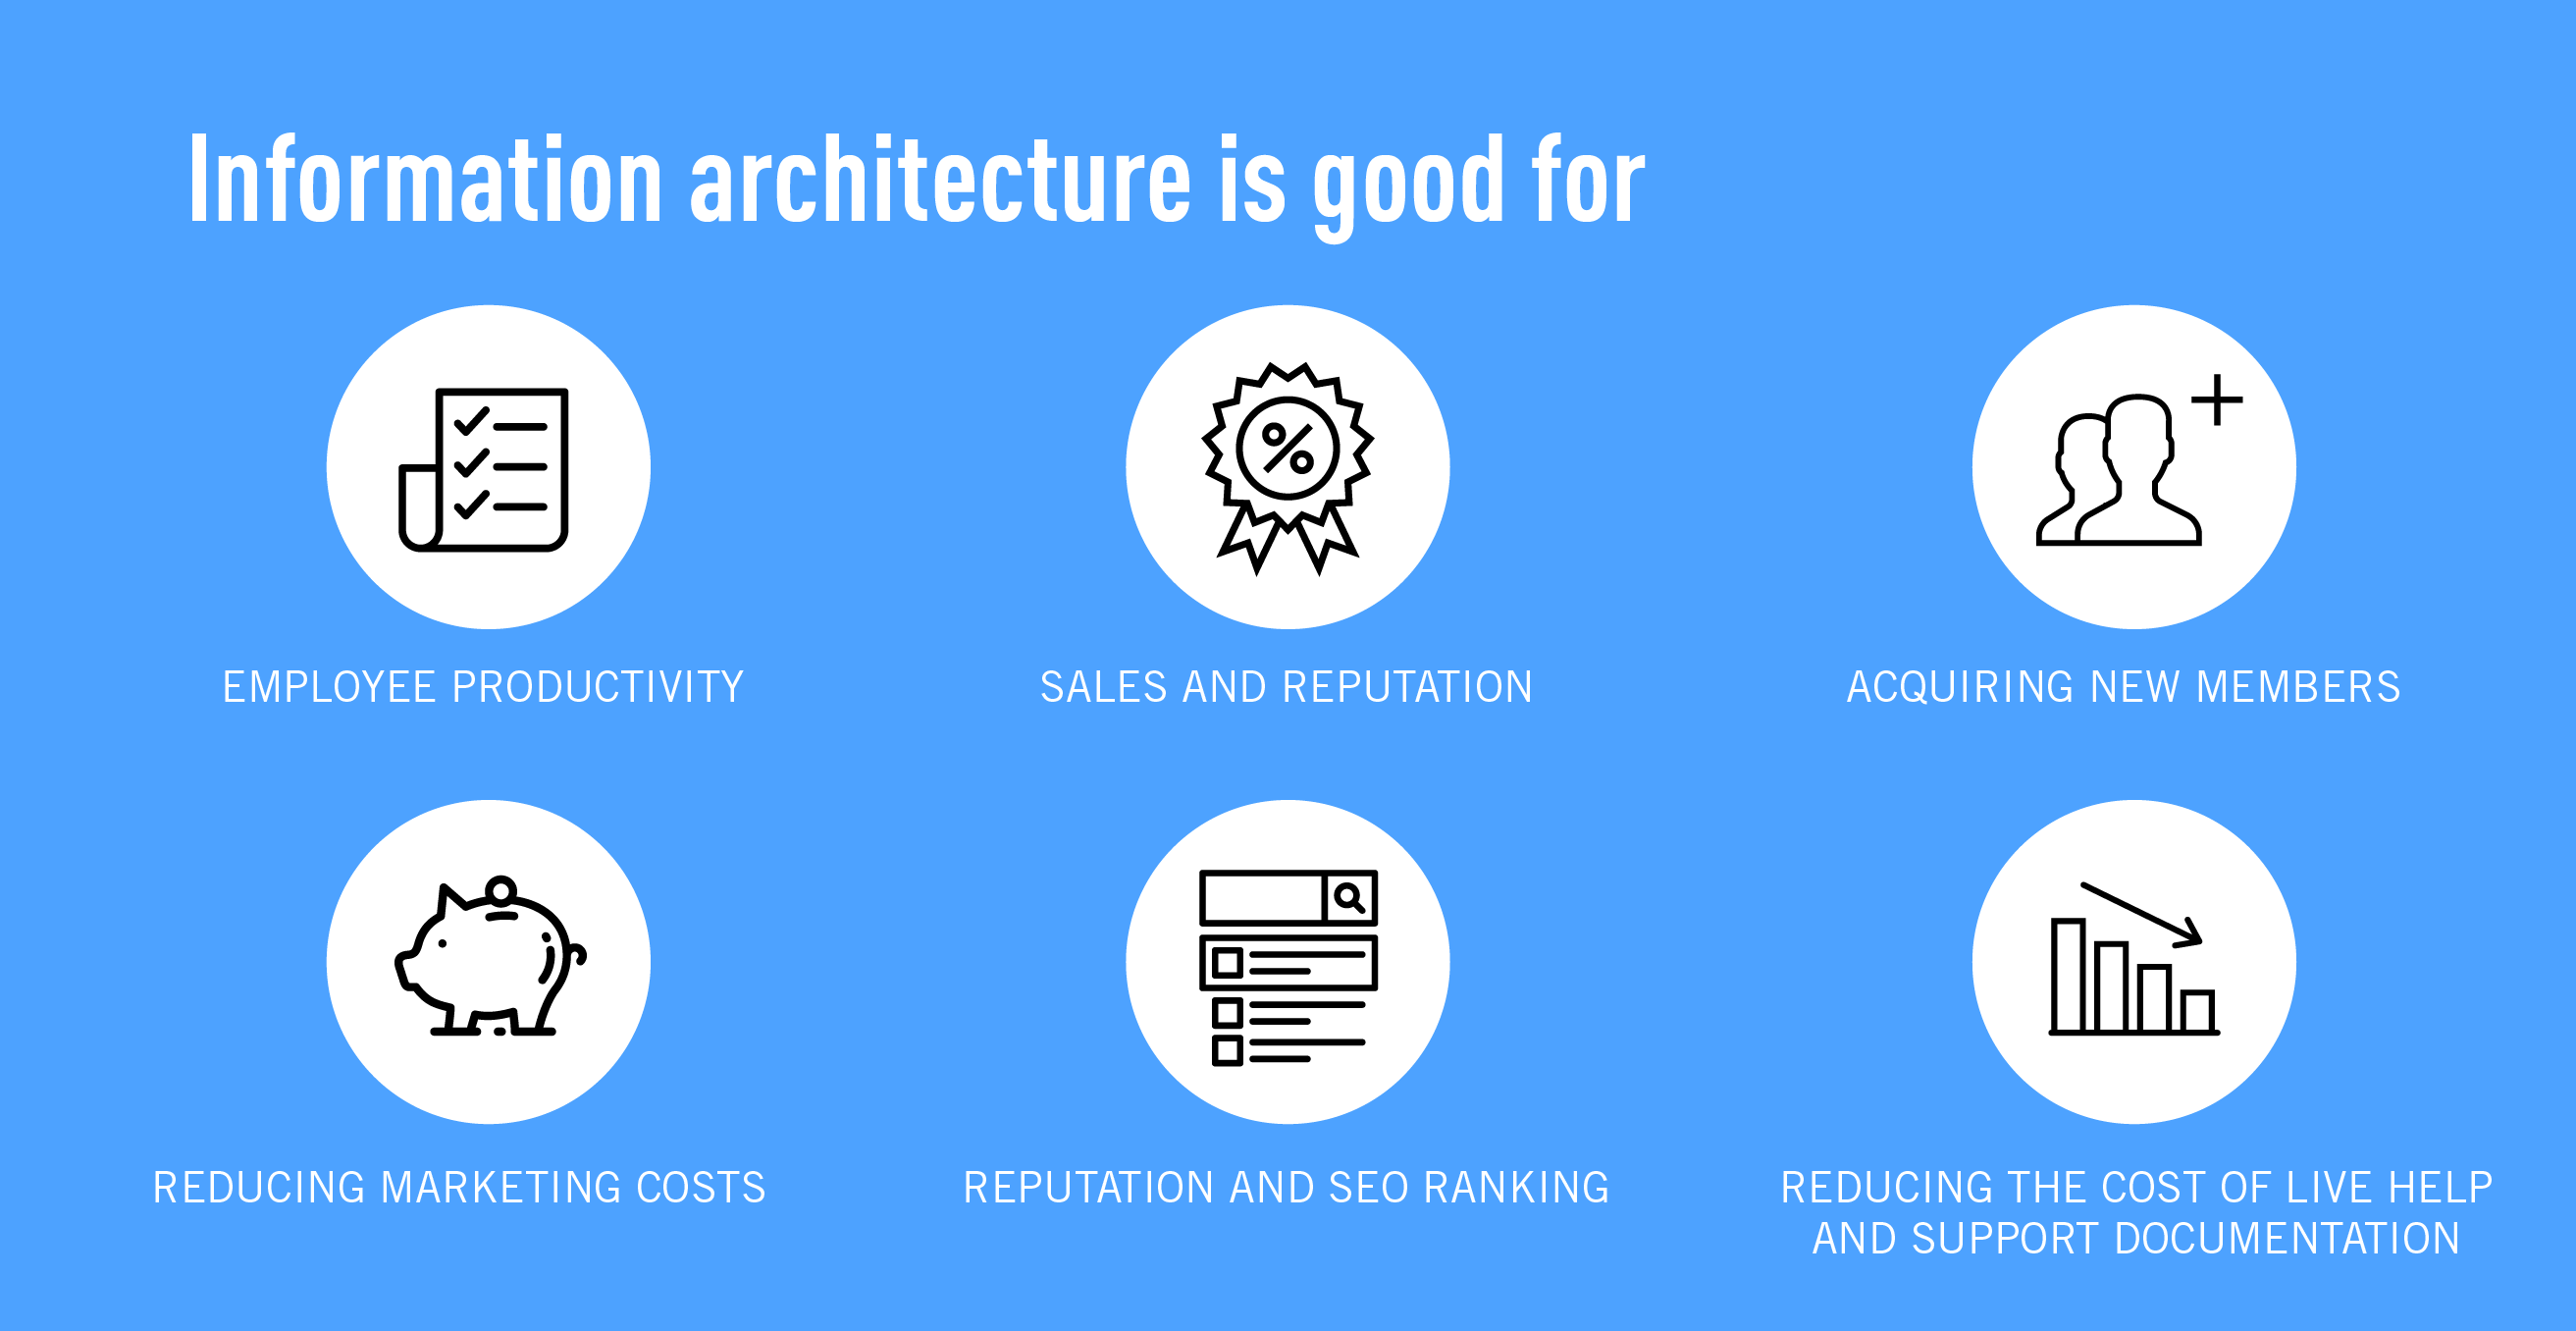 What information architecture is good for